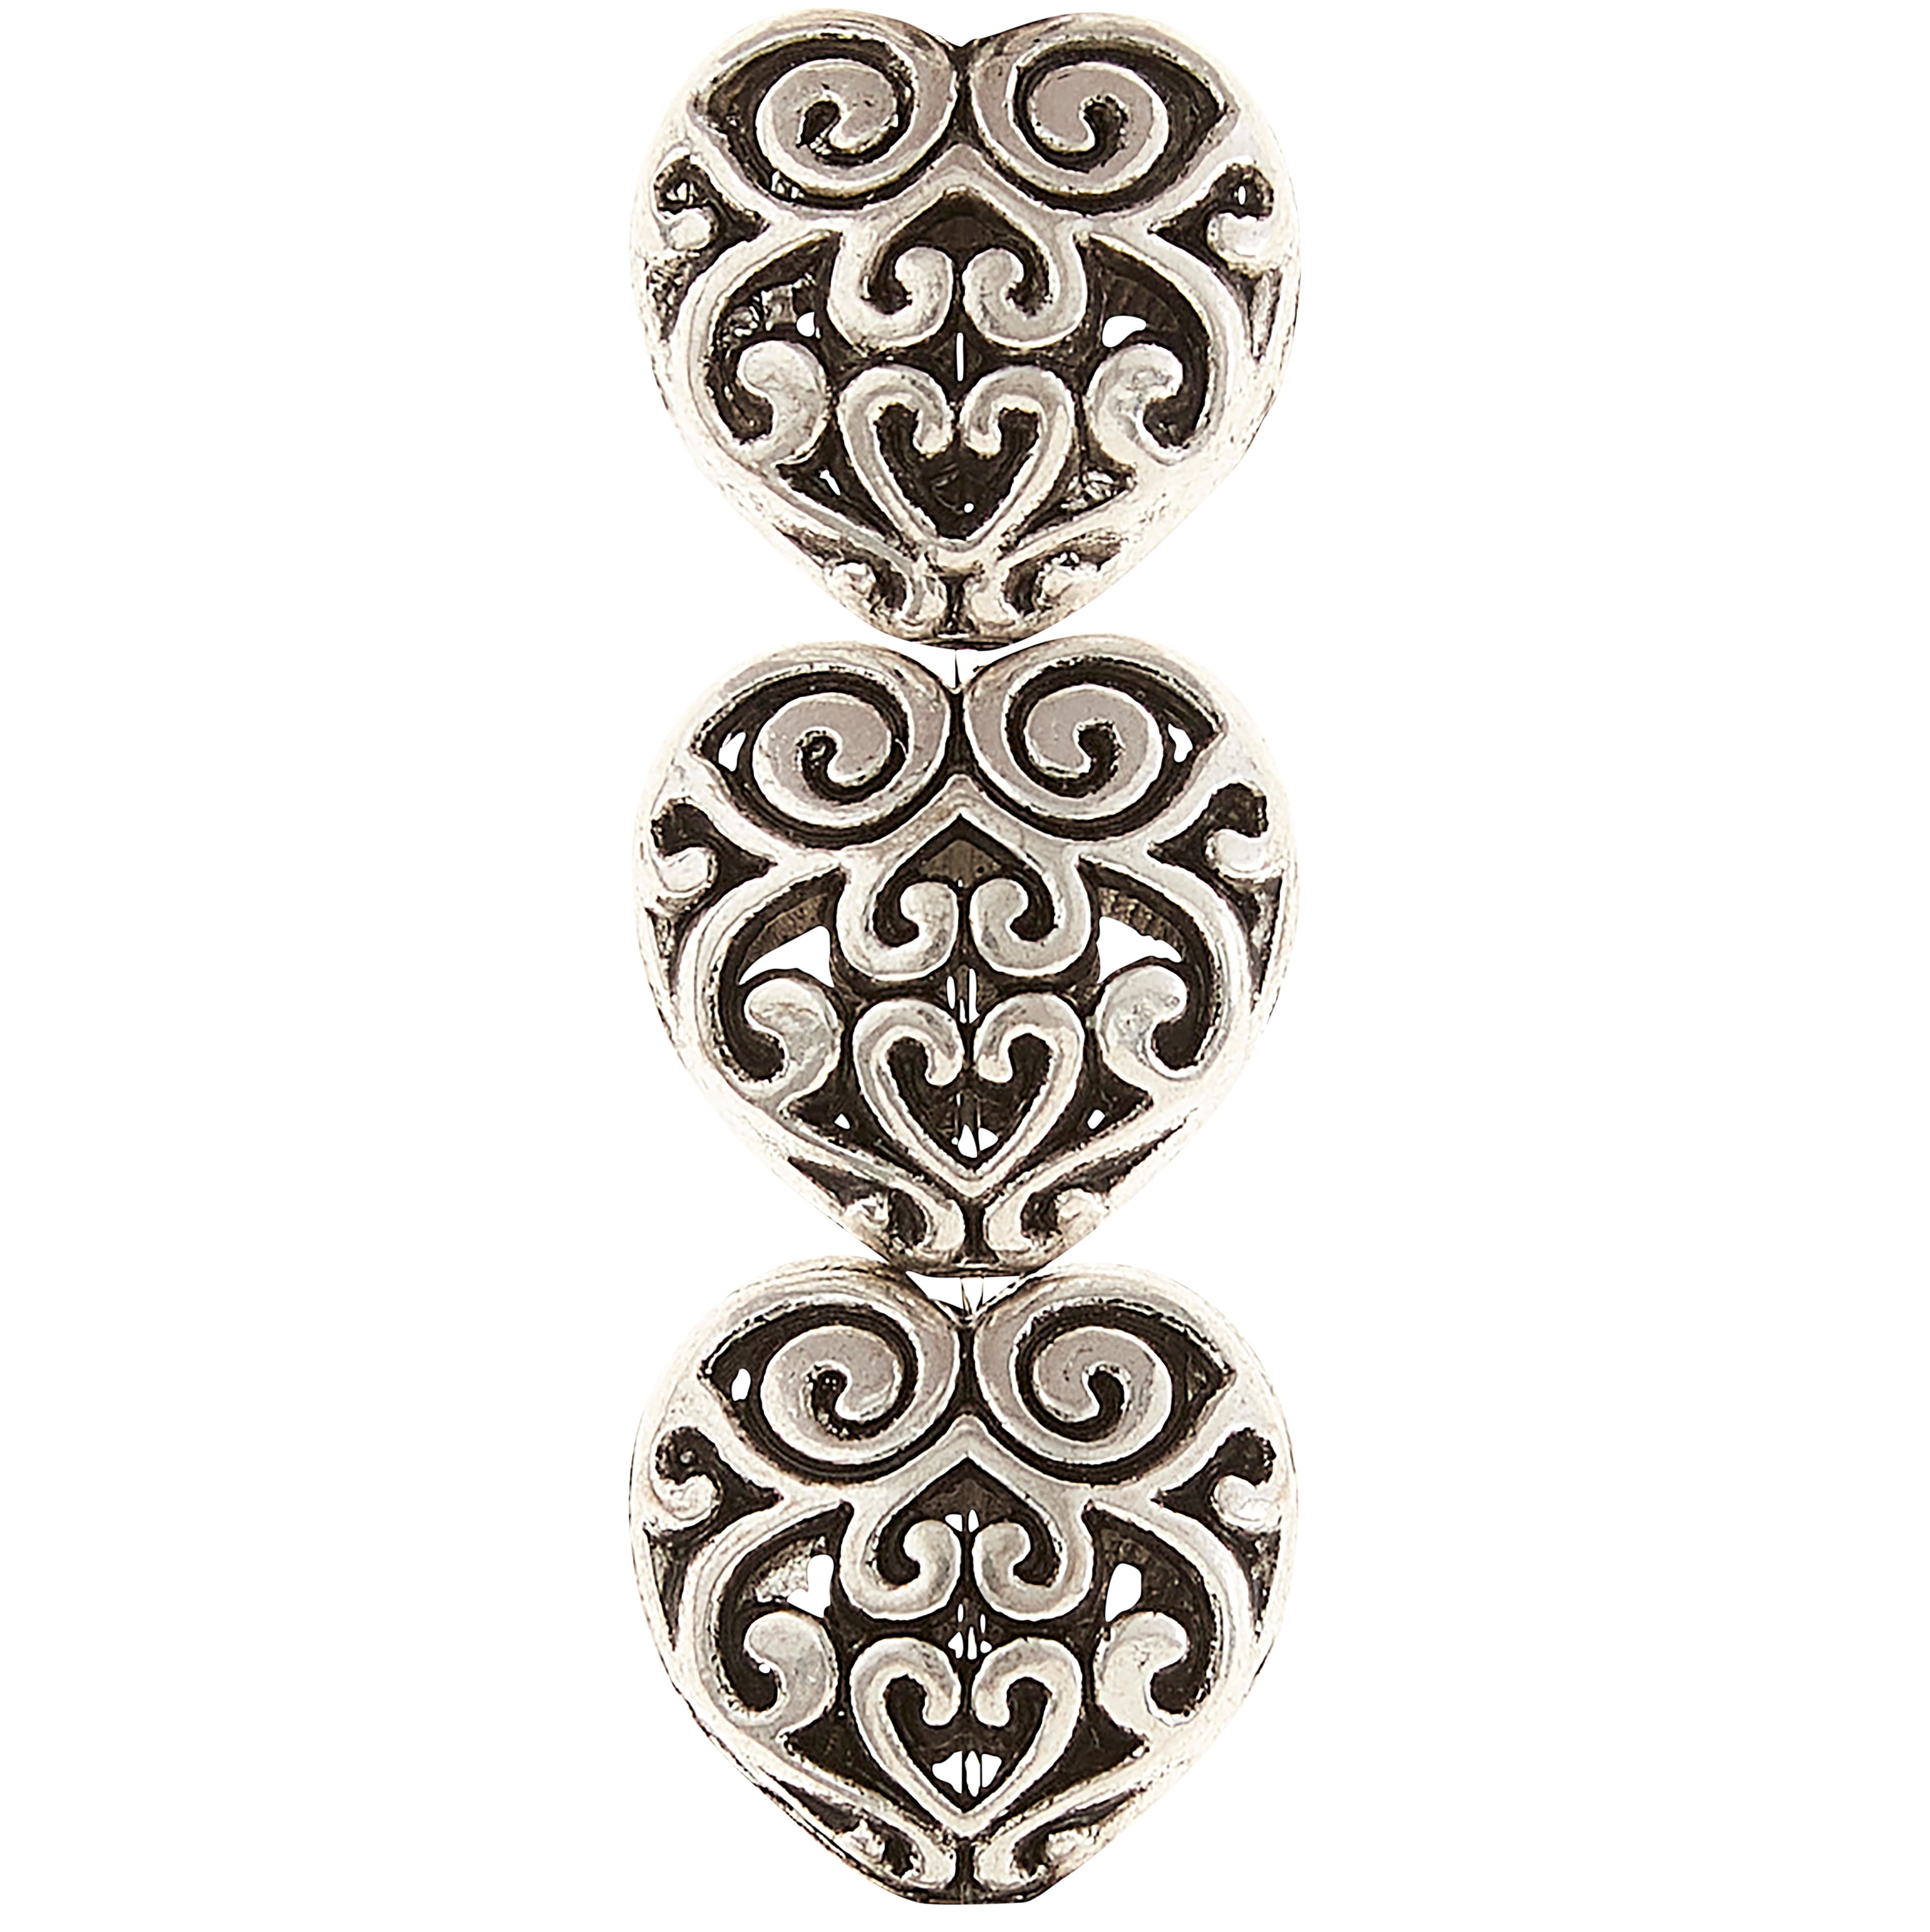 12 Pack:  Silver Plated Filigree Heart Beads, 13mm by Bead Landing&#x2122;